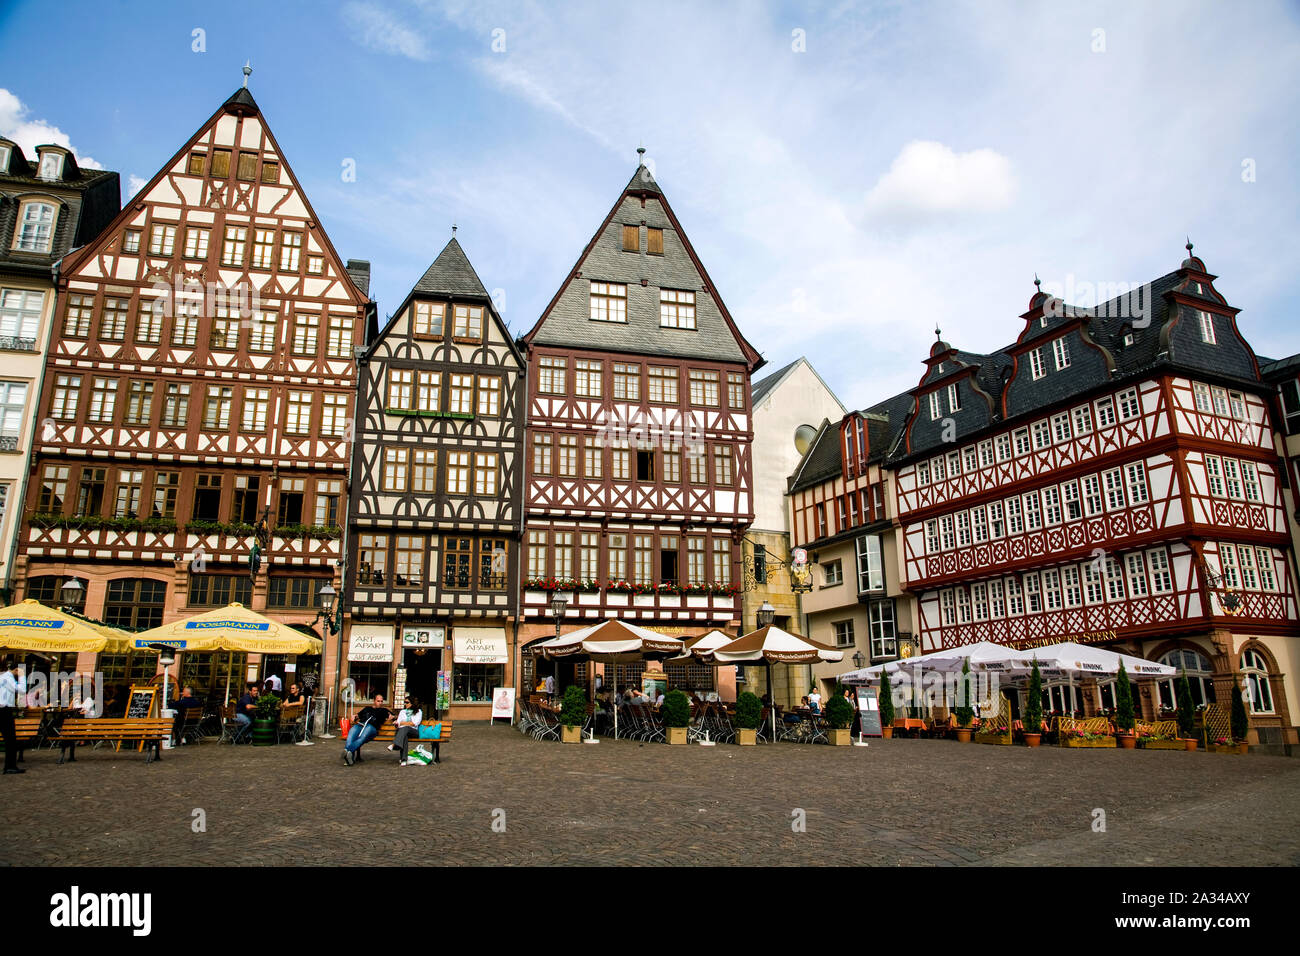 Historic buildings and street cafes in the Romerberg district of Frankfurt-am-Main Germany Stock Photo